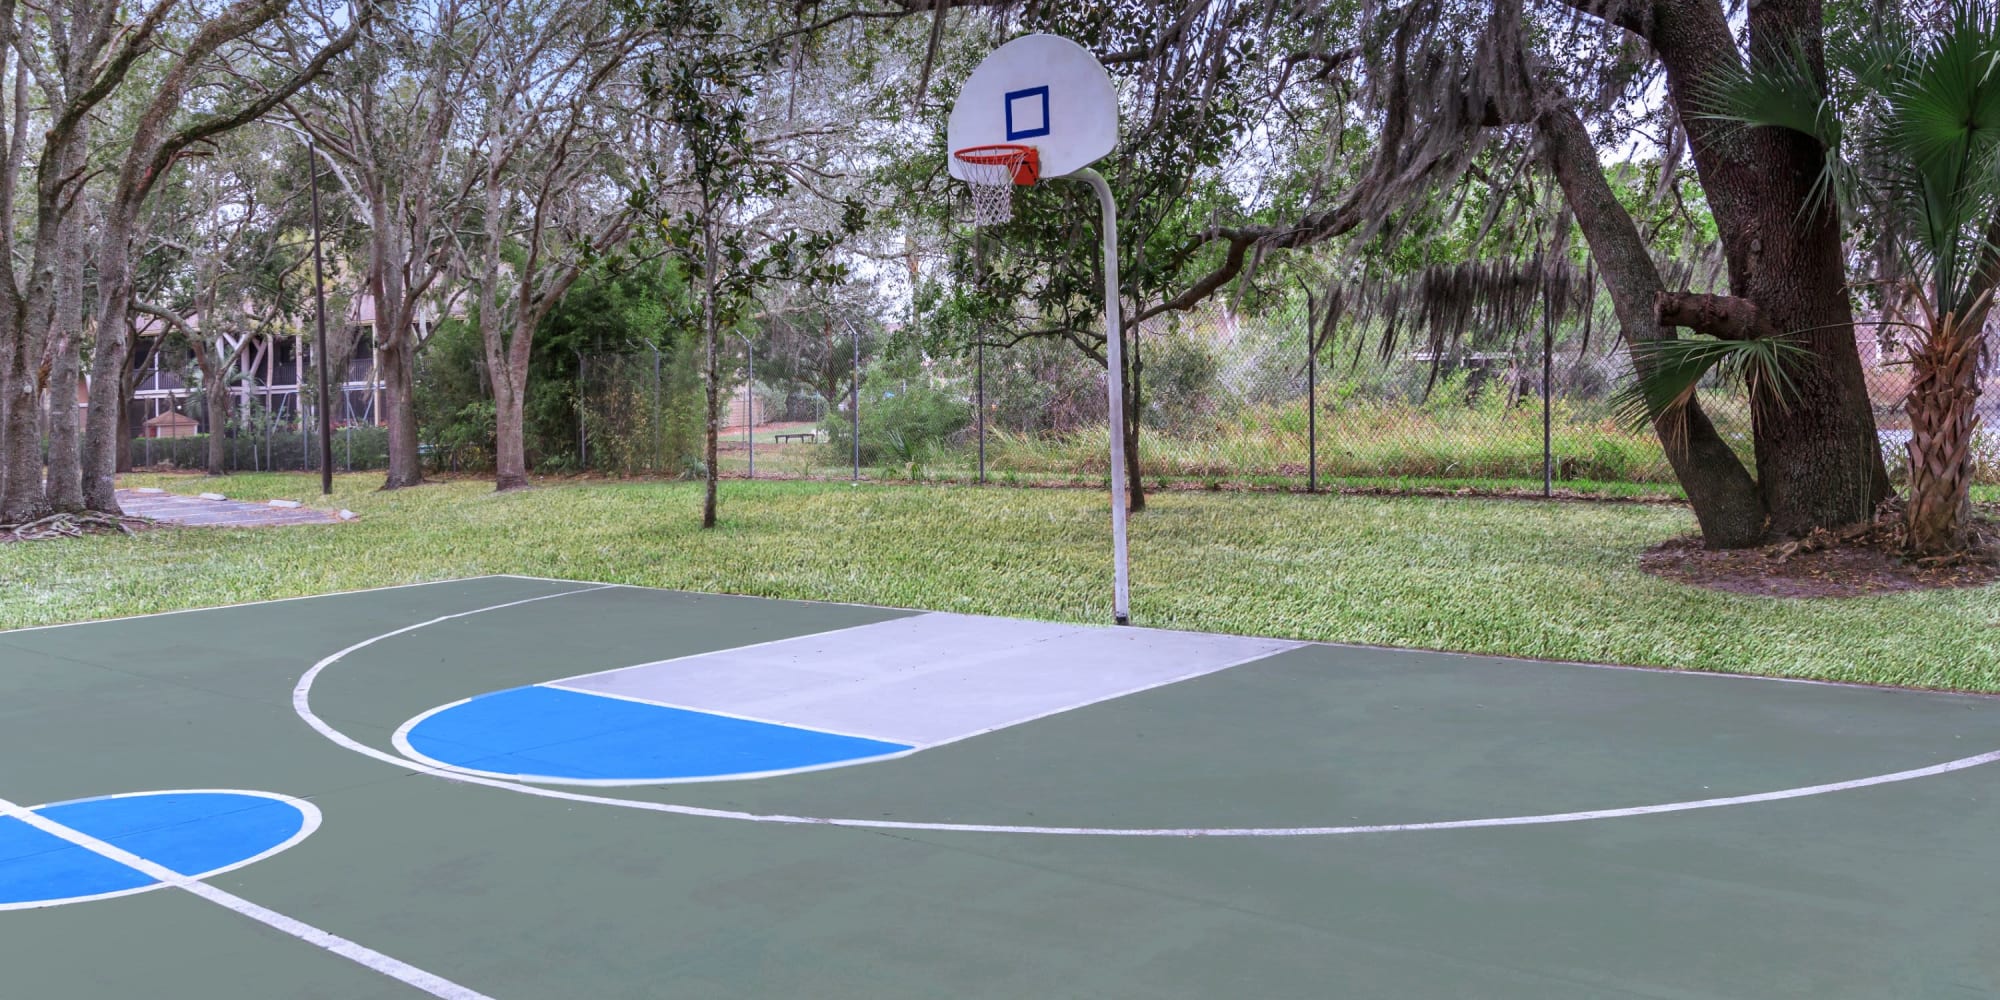 Basketball court at Images Condominiums in Kissimmee, Florida